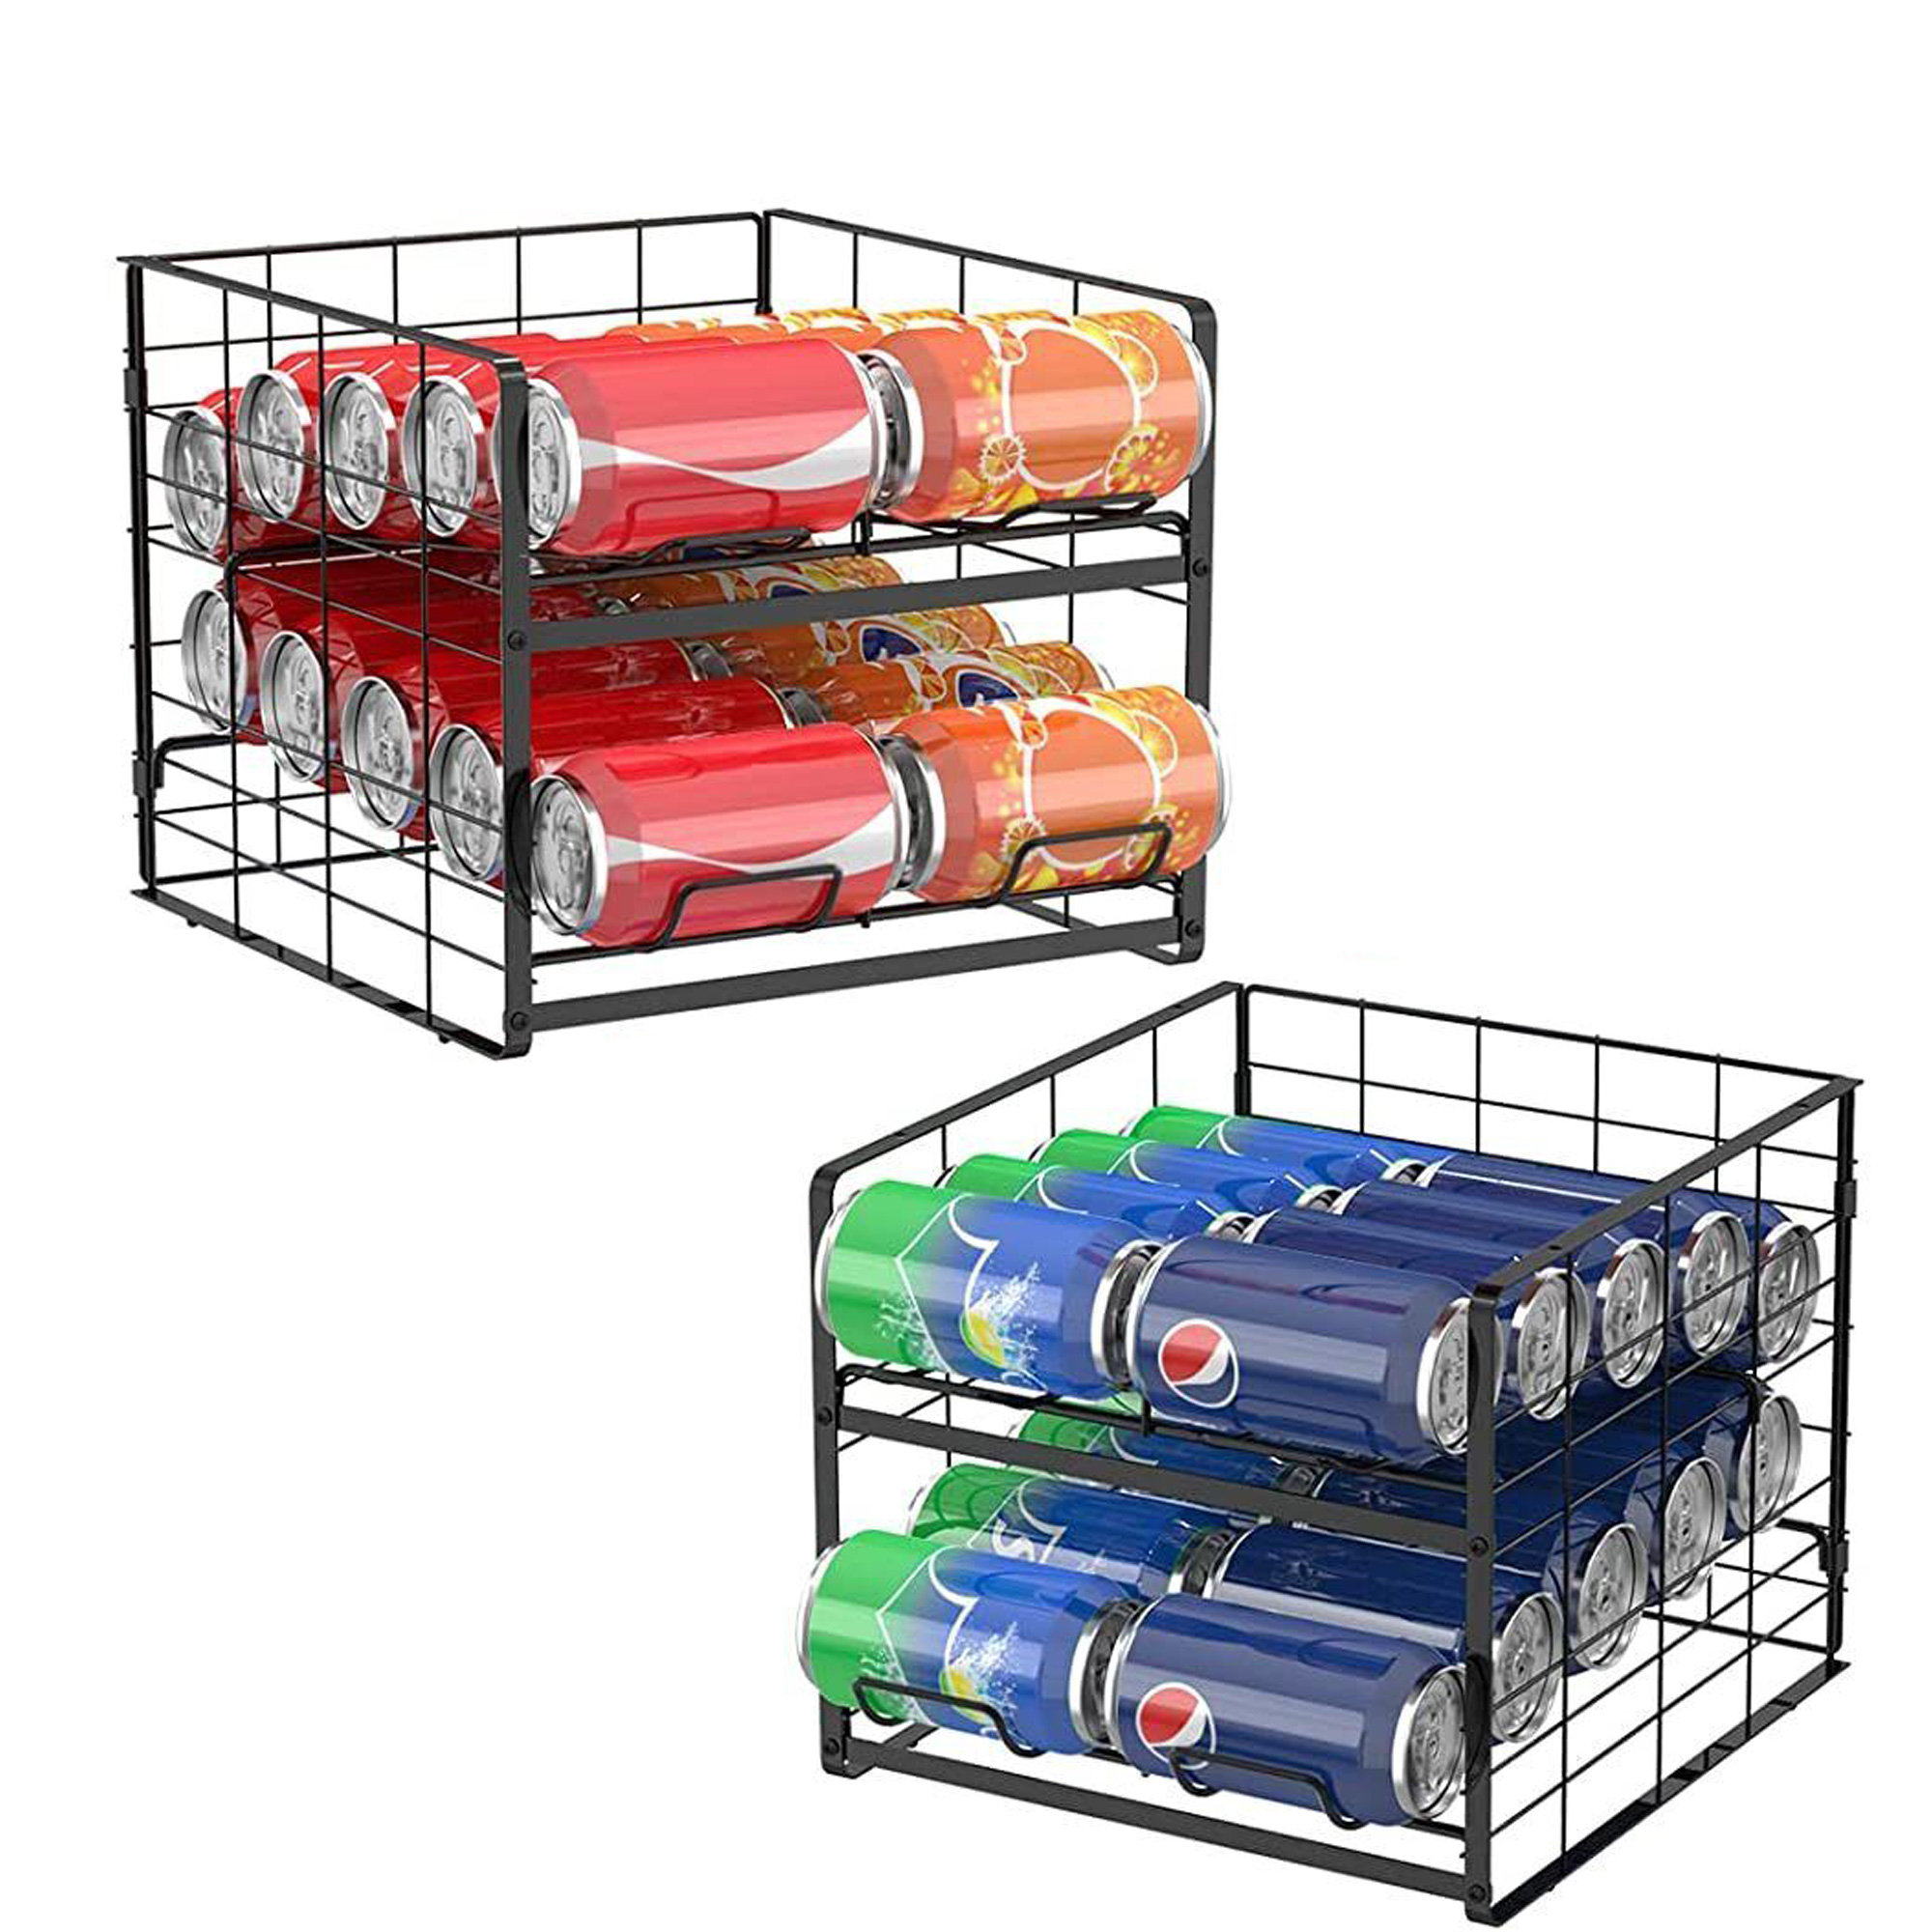 Rebrilliant Kheri Stackable Can Rack Organizer 2 Tier Holds 40Cans